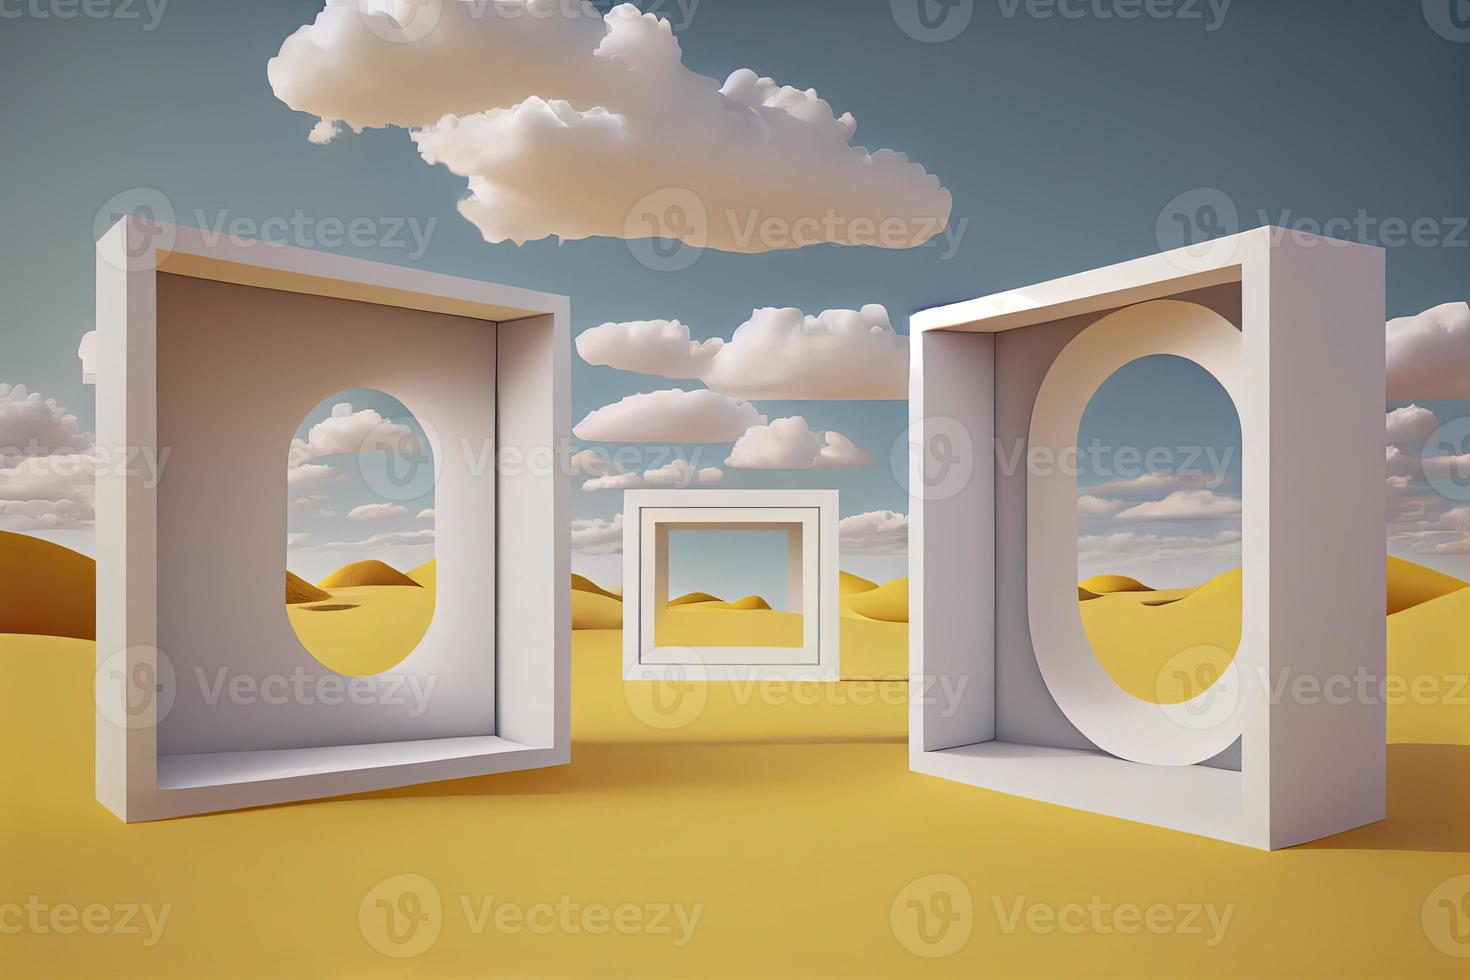 Surreal desert landscape with white clouds going into the yellow square portals on sunny day photo